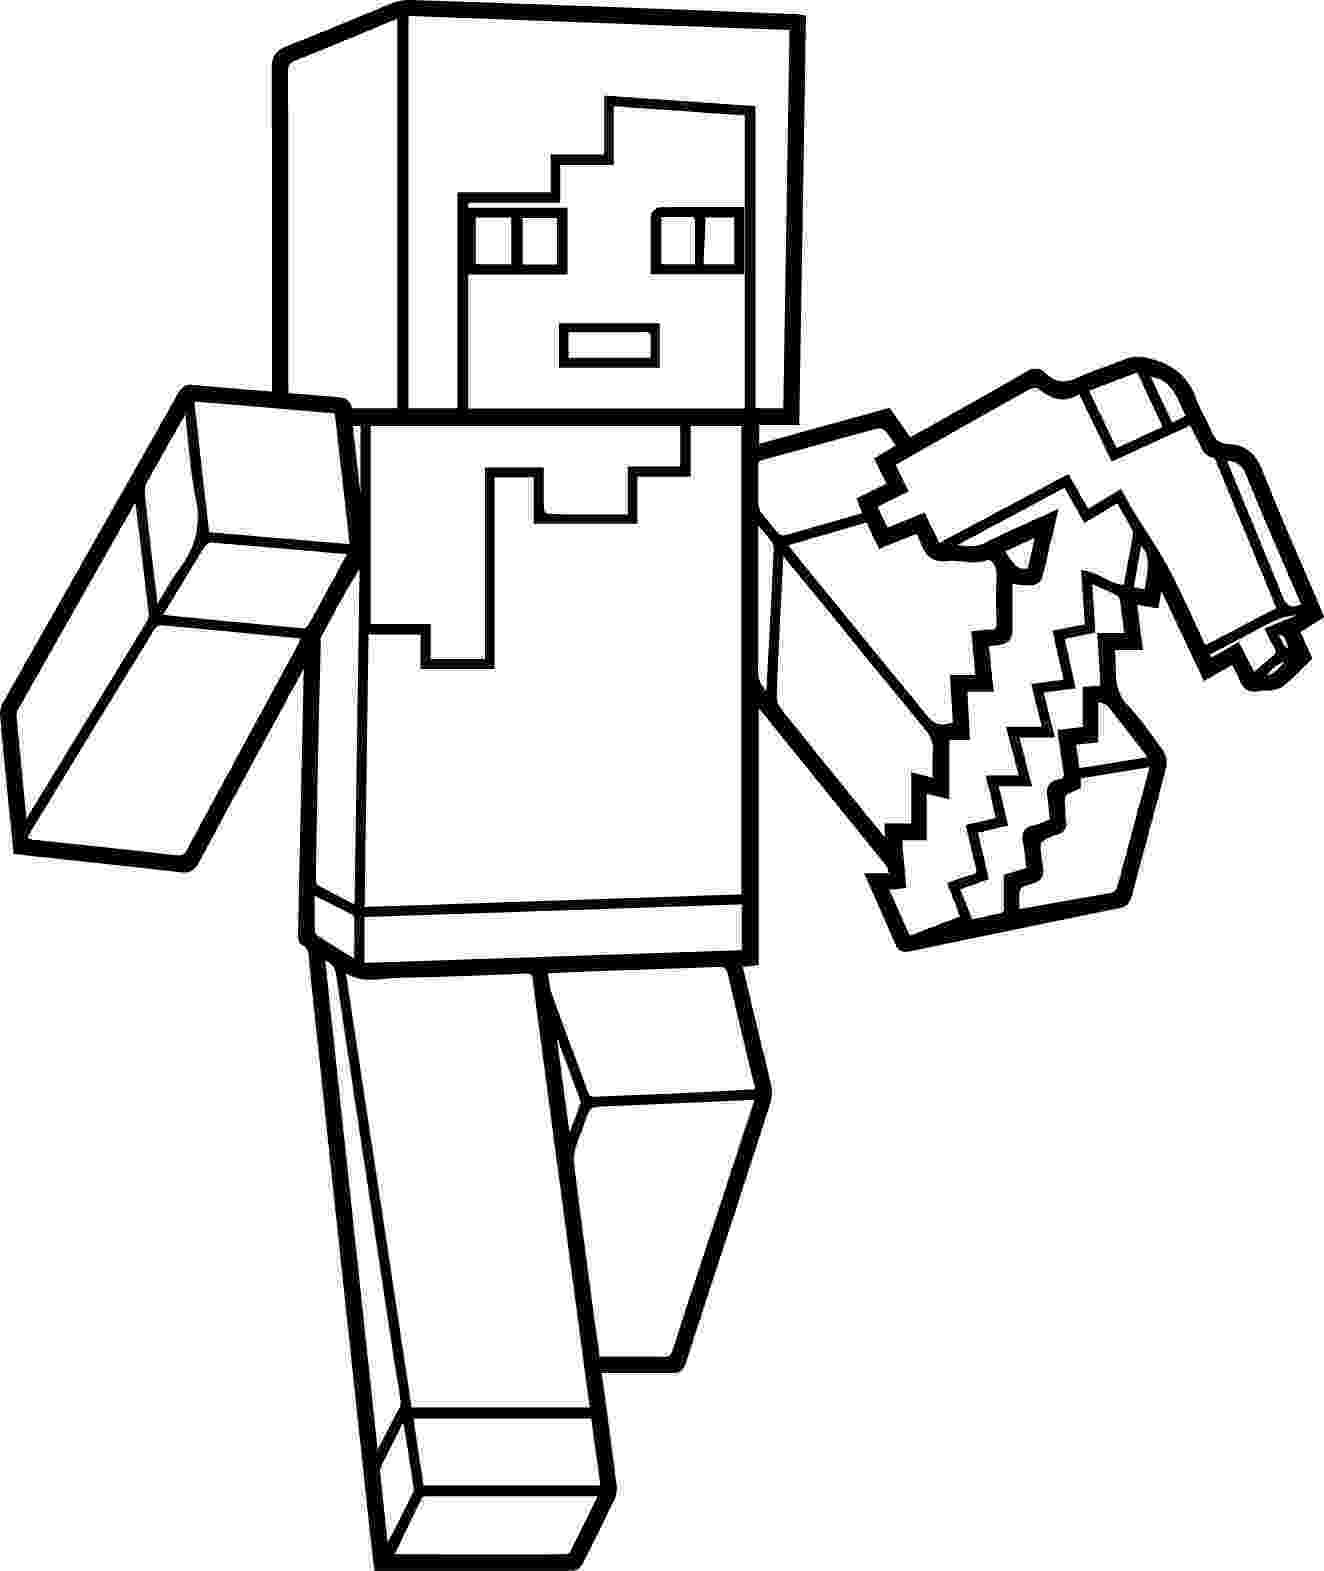 minecraft coloring sheets free minecraft coloring pages best coloring pages for kids free coloring minecraft sheets 